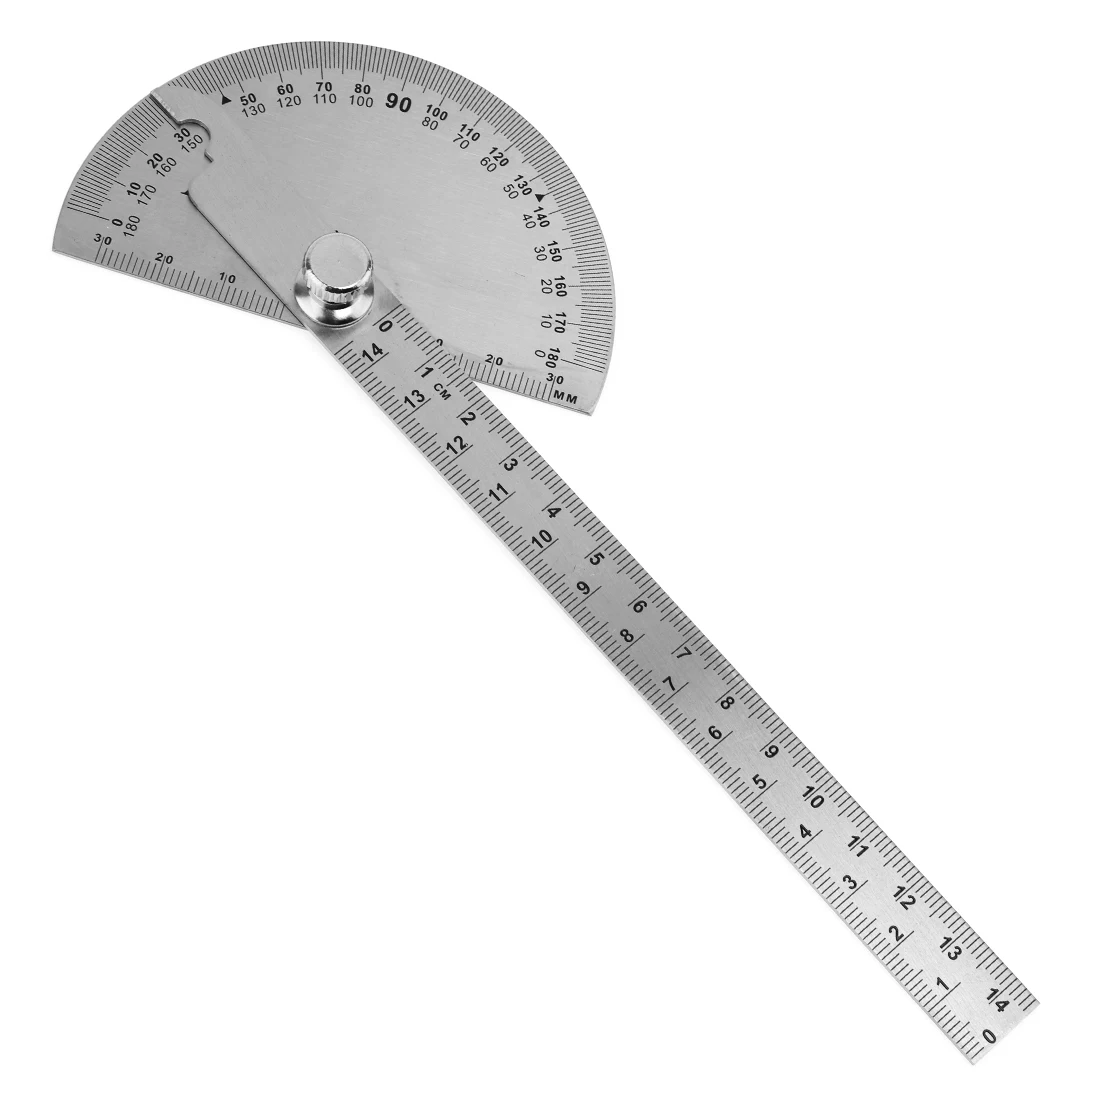 

0-180 Degree 90x150mm Adjustable Angle Ruler 145mm Round Head Rotary Protractor and Nut Stainless Steel for Home Measurement